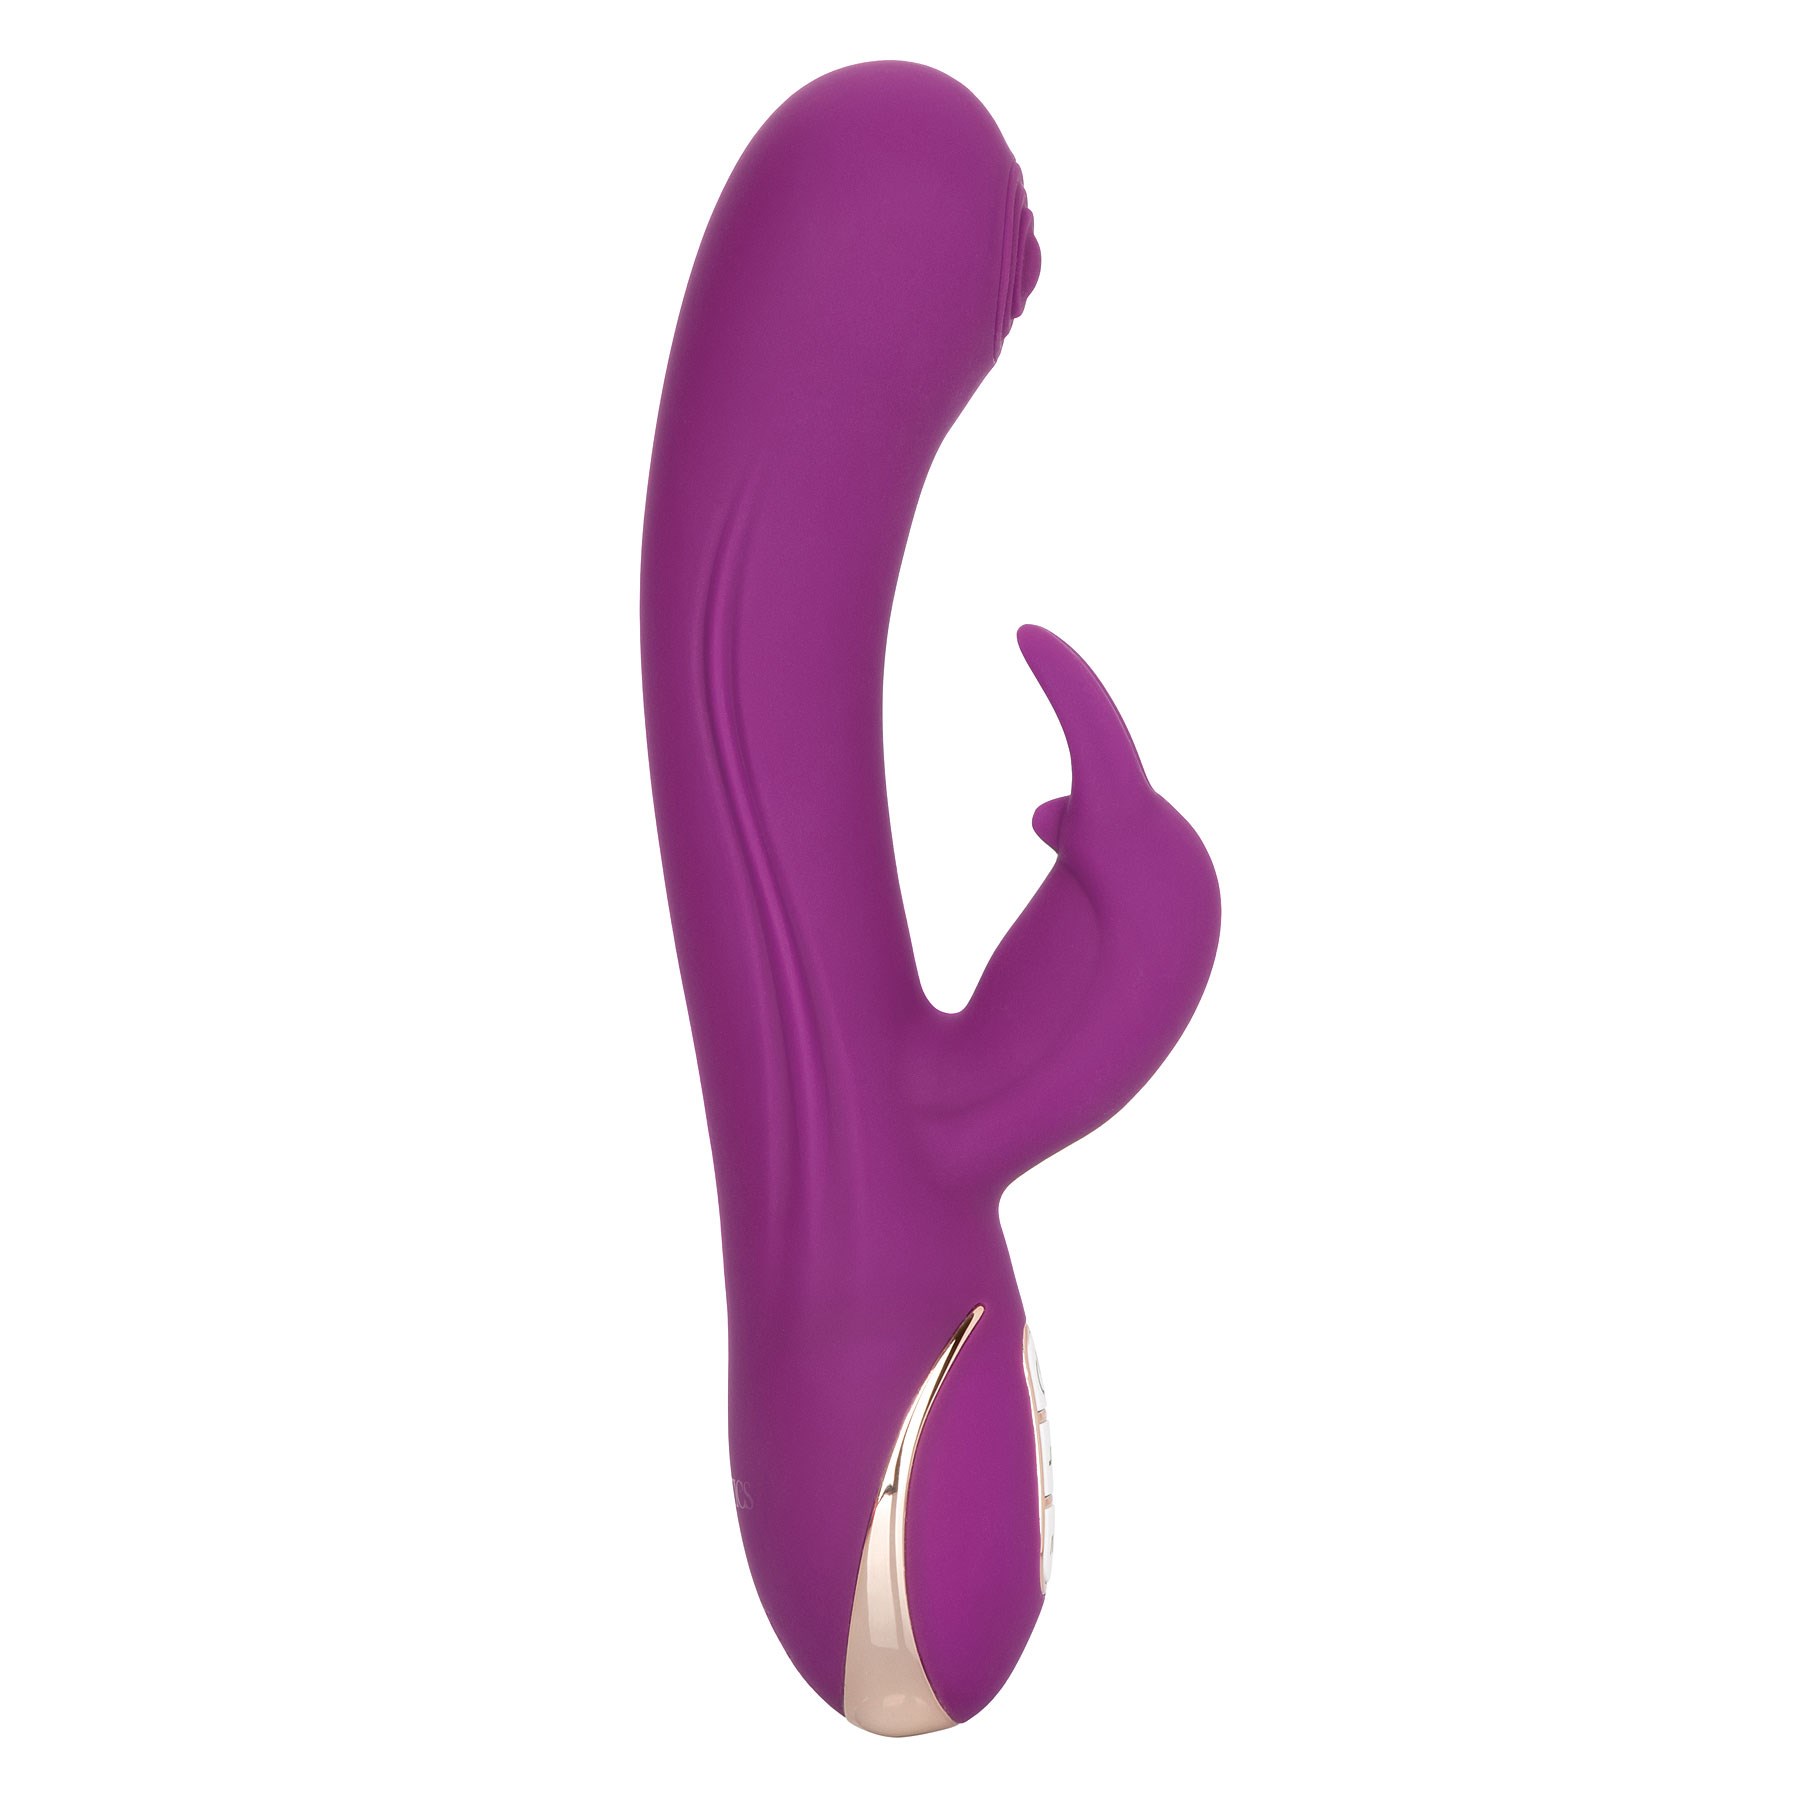 Jack Rabbit Signature Silicone Thumping Rabbit side view